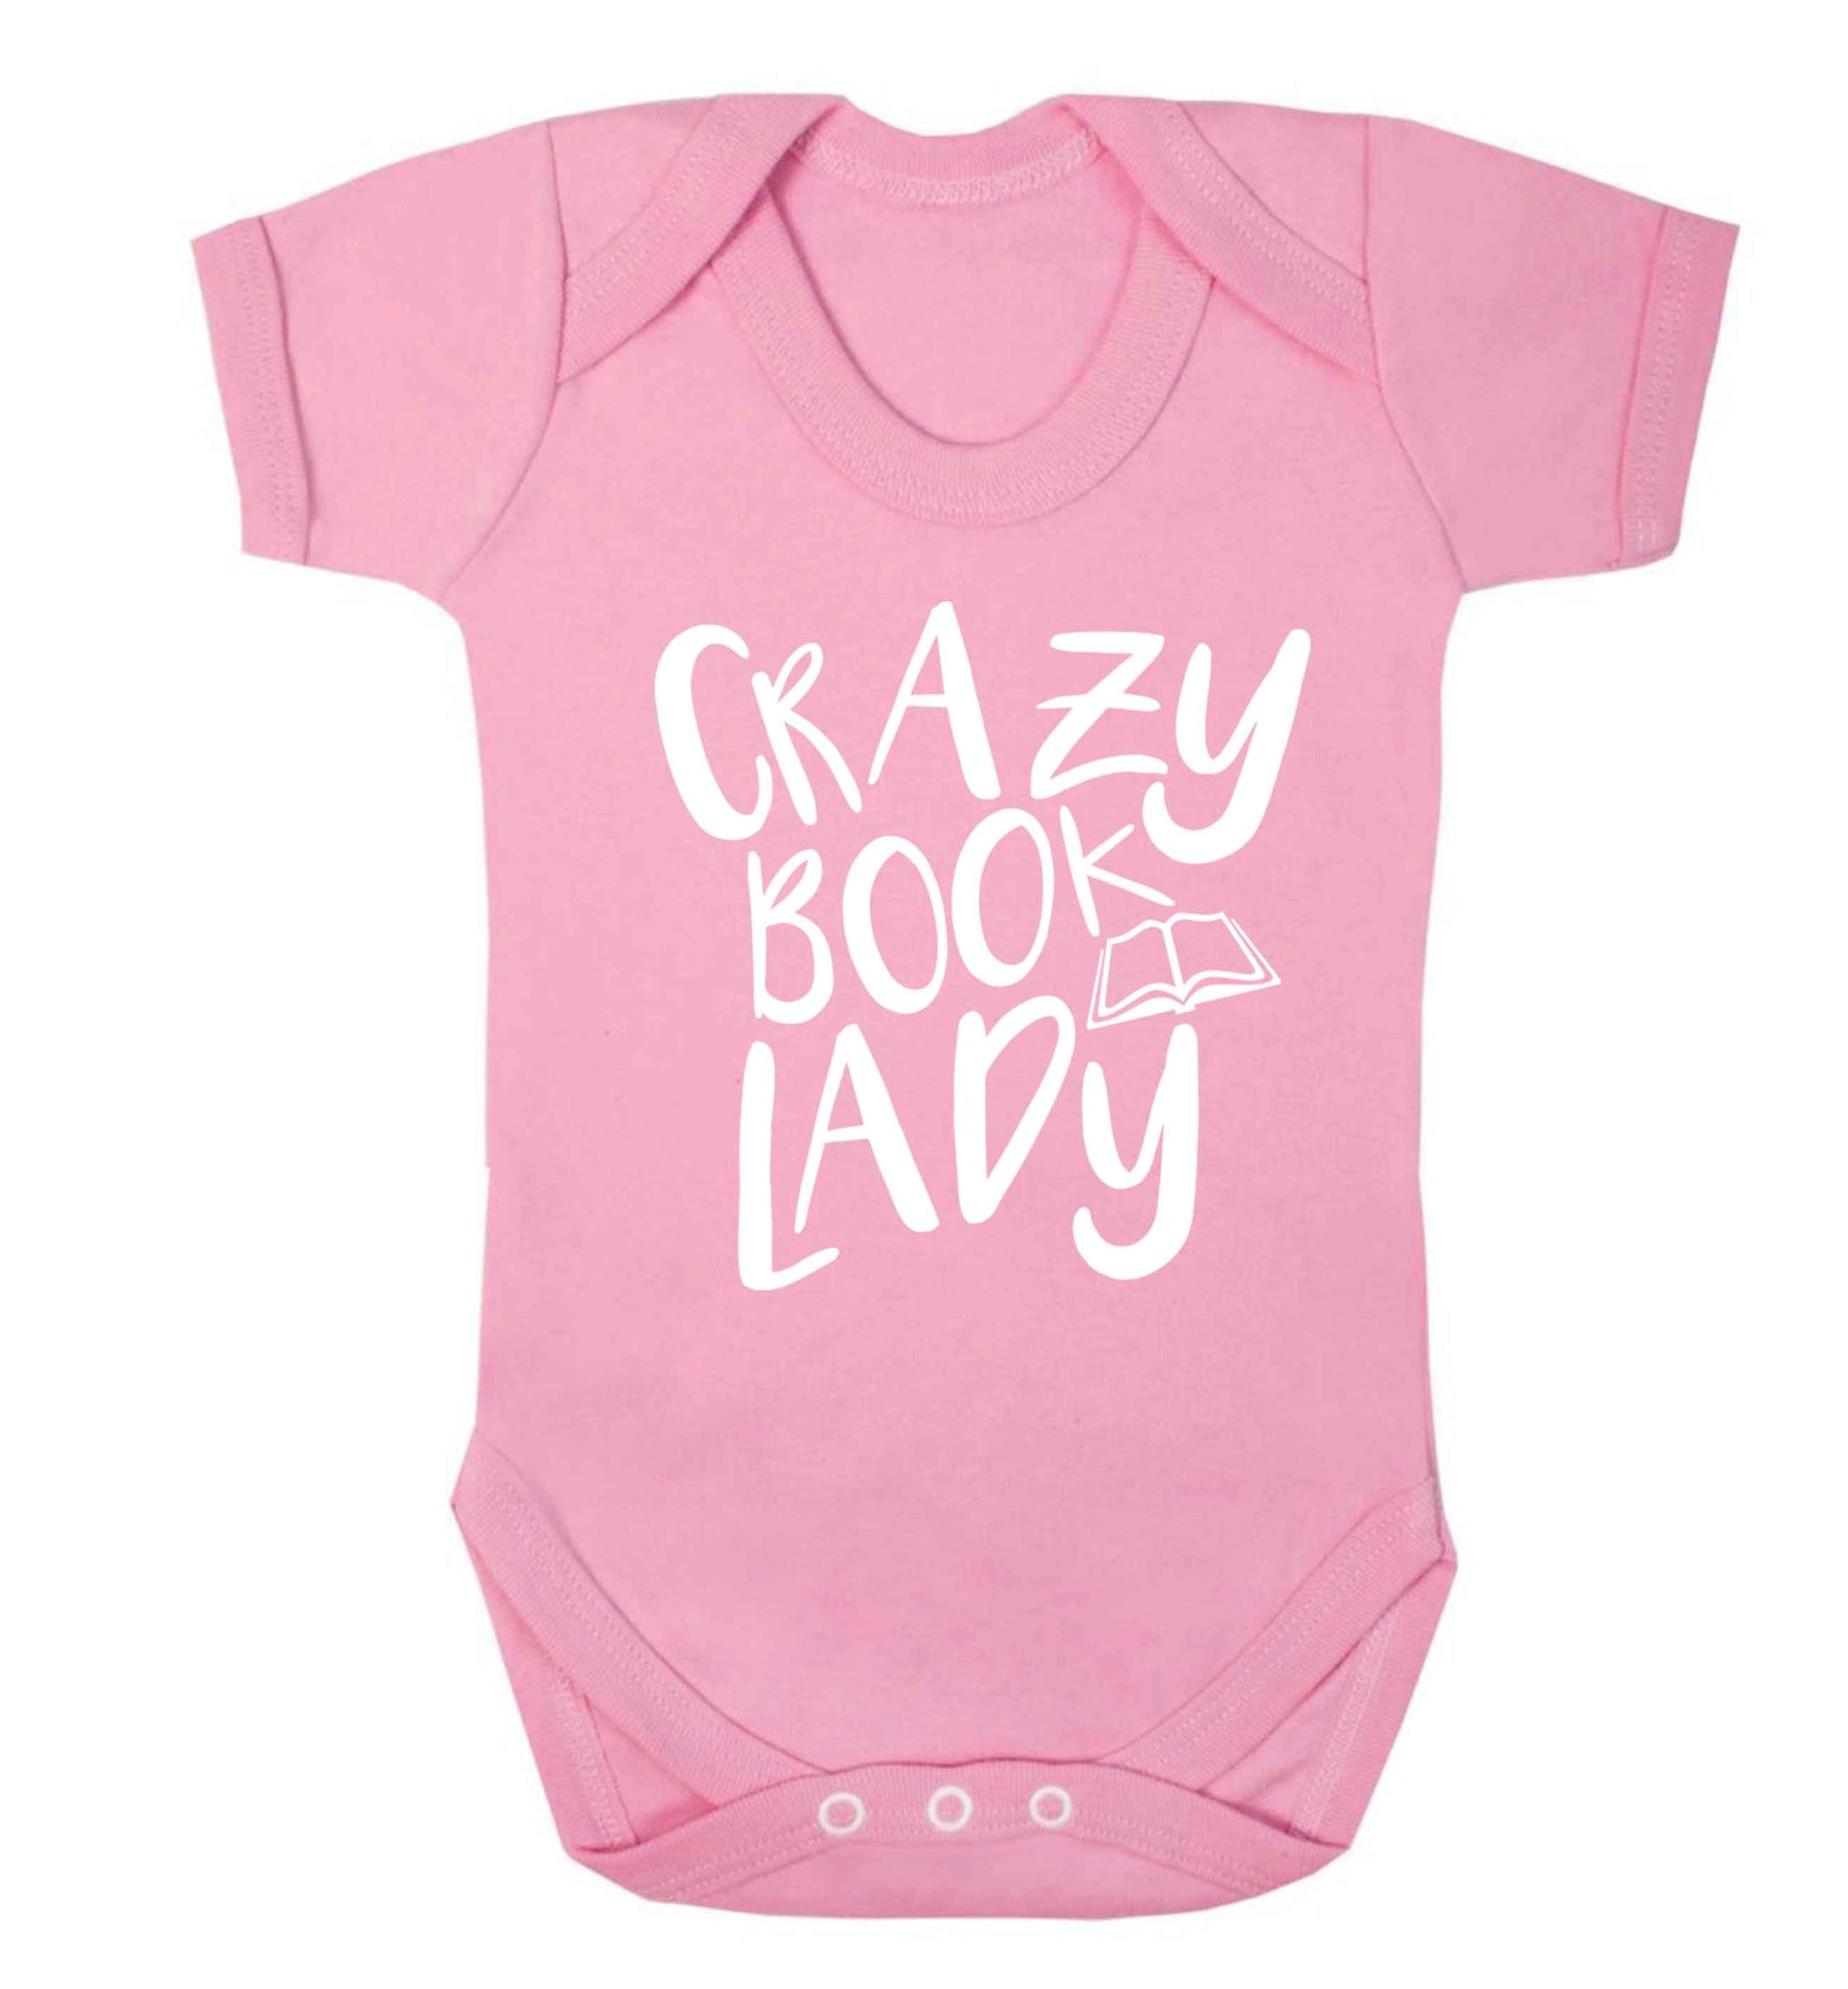 Crazy book lady Baby Vest pale pink 18-24 months